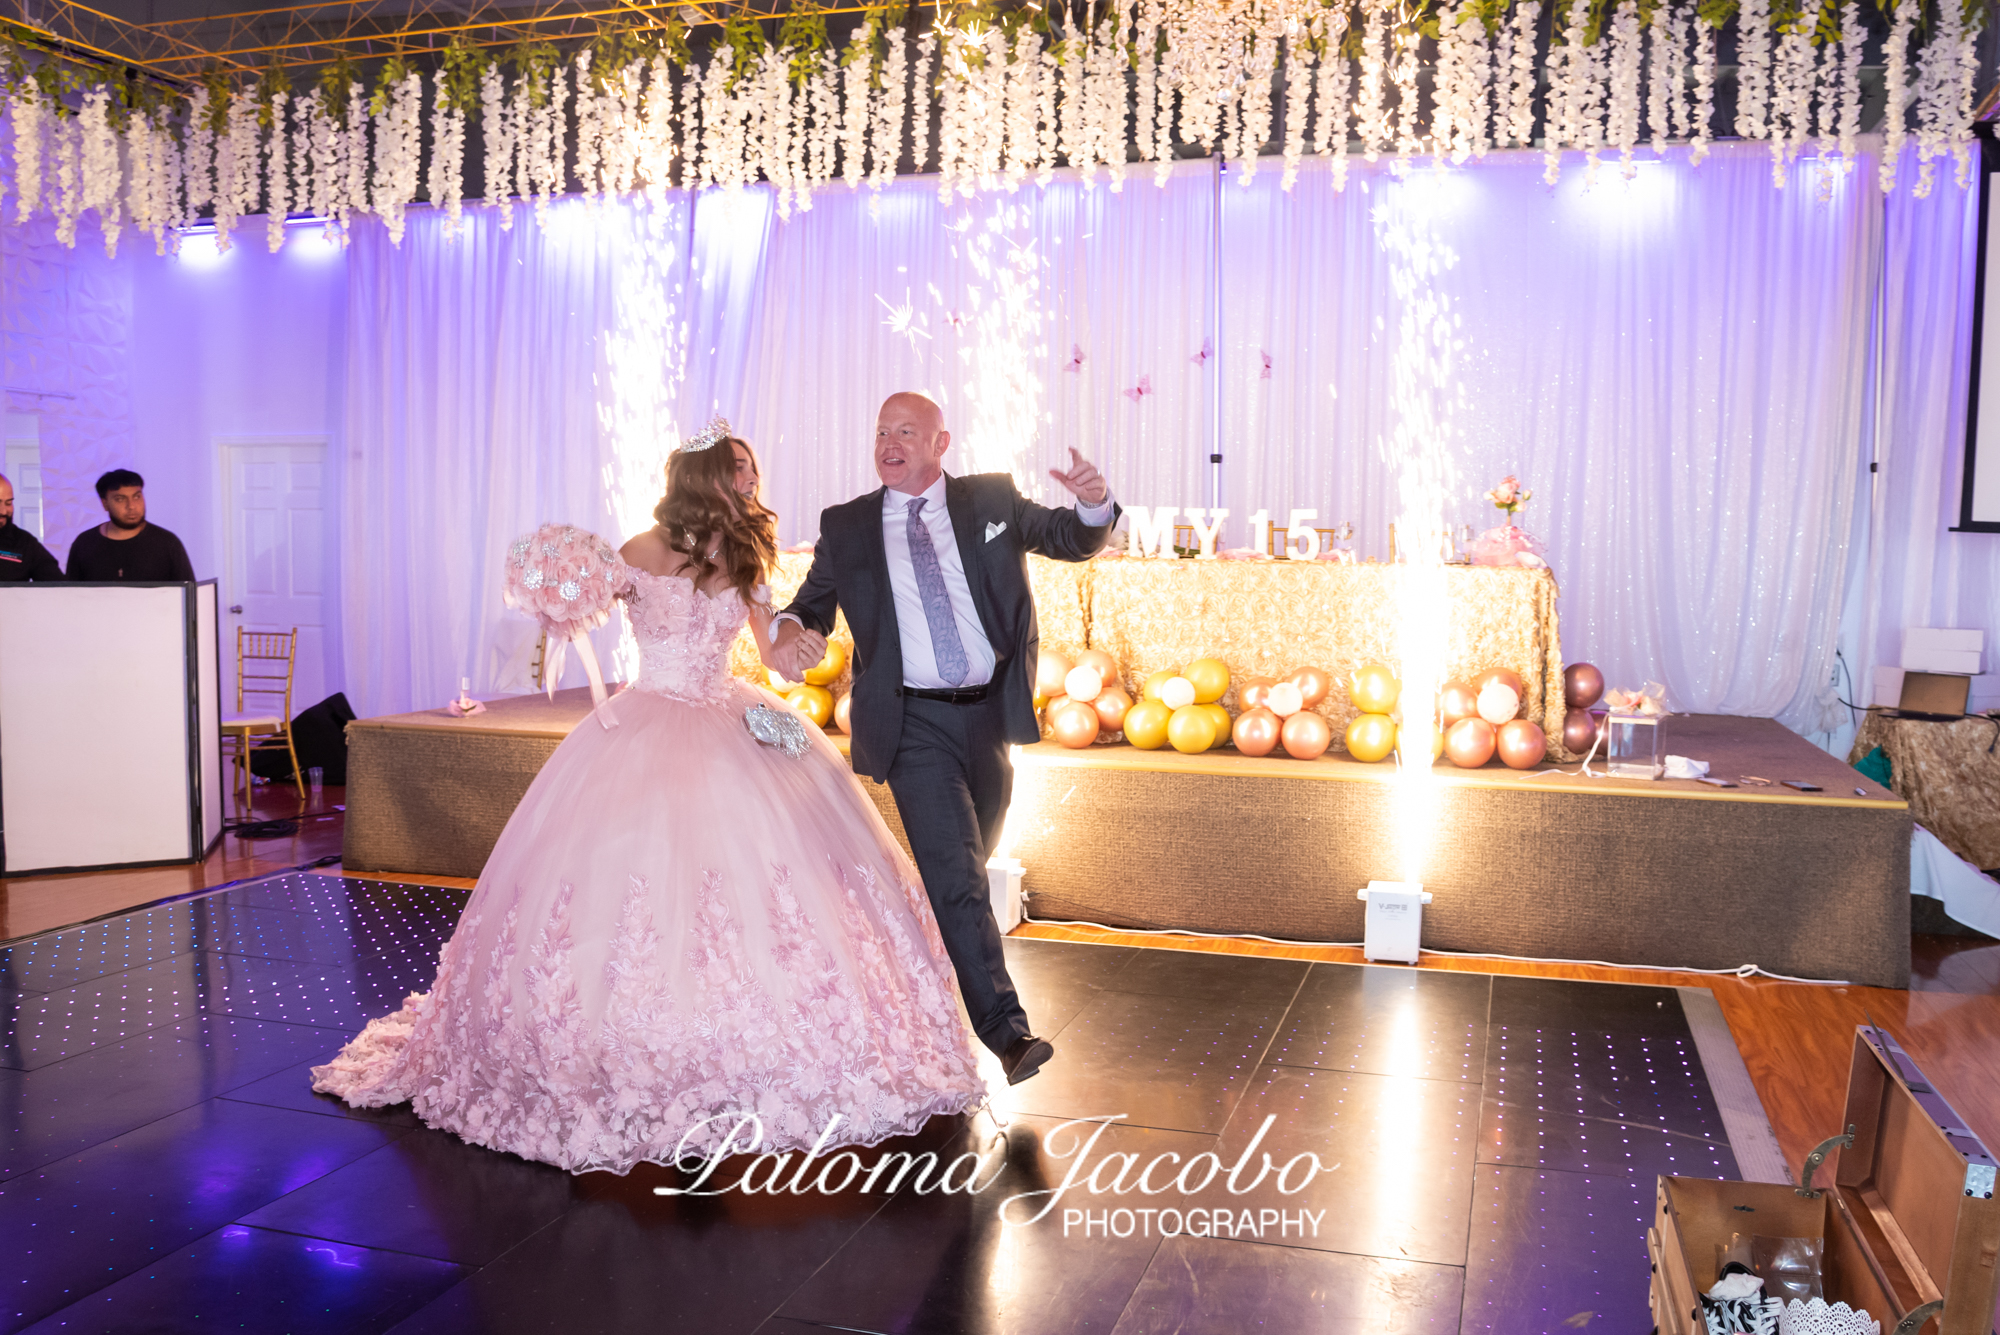 Quinceanera dancing with dad at Royal Banquet Hall by Paloma Jacobo Photography